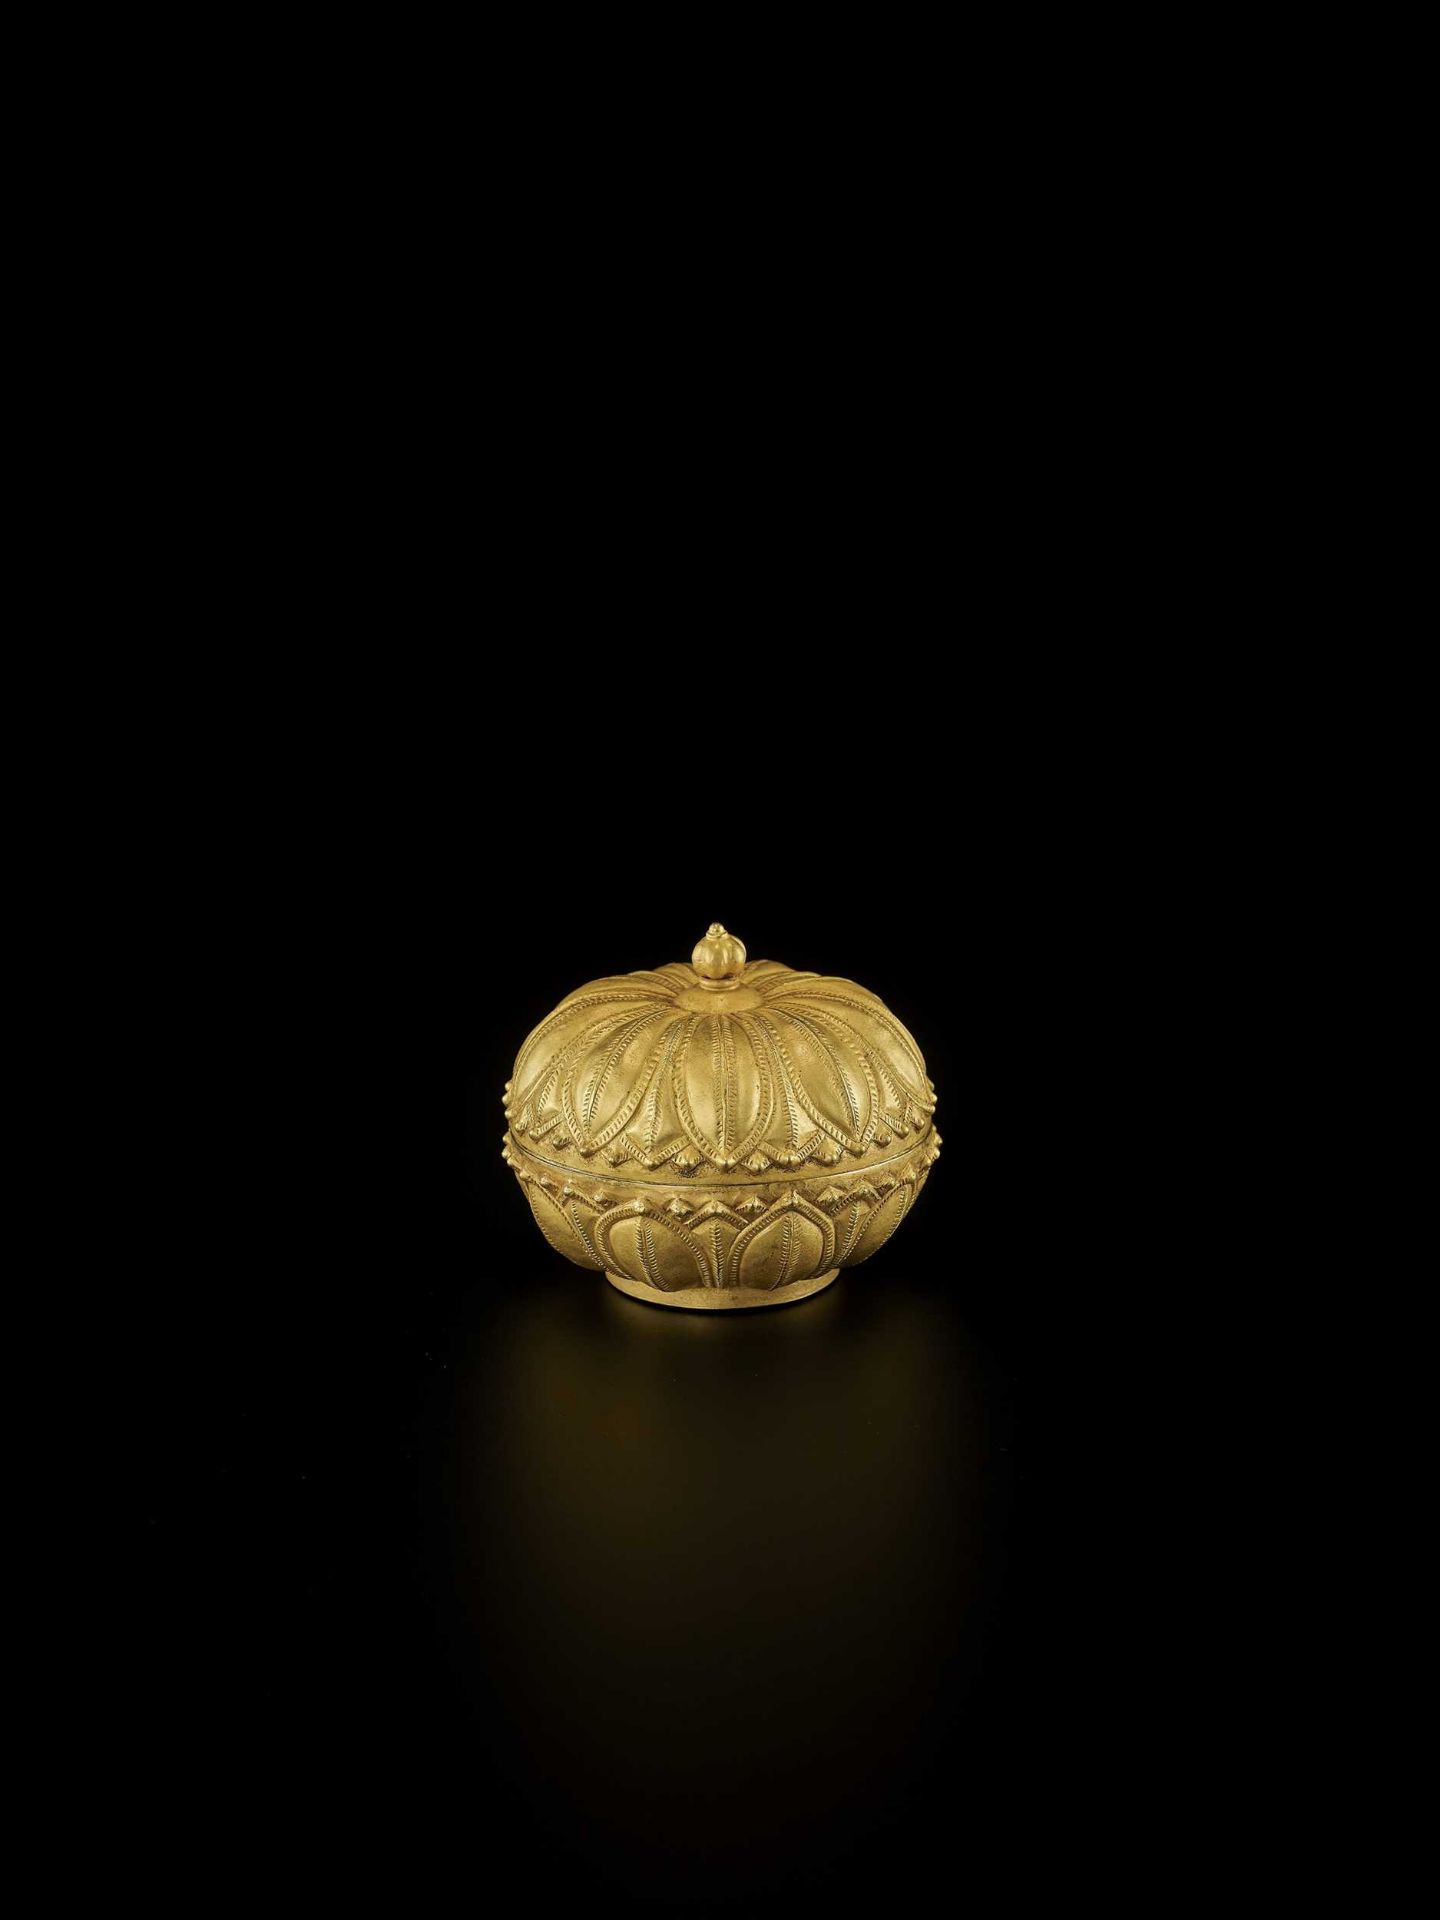 A RARE AND EXCEPTIONAL CHAM GOLD REPOUSSÉ ‘LOTUS’ MEDICINE BOX AND COVER